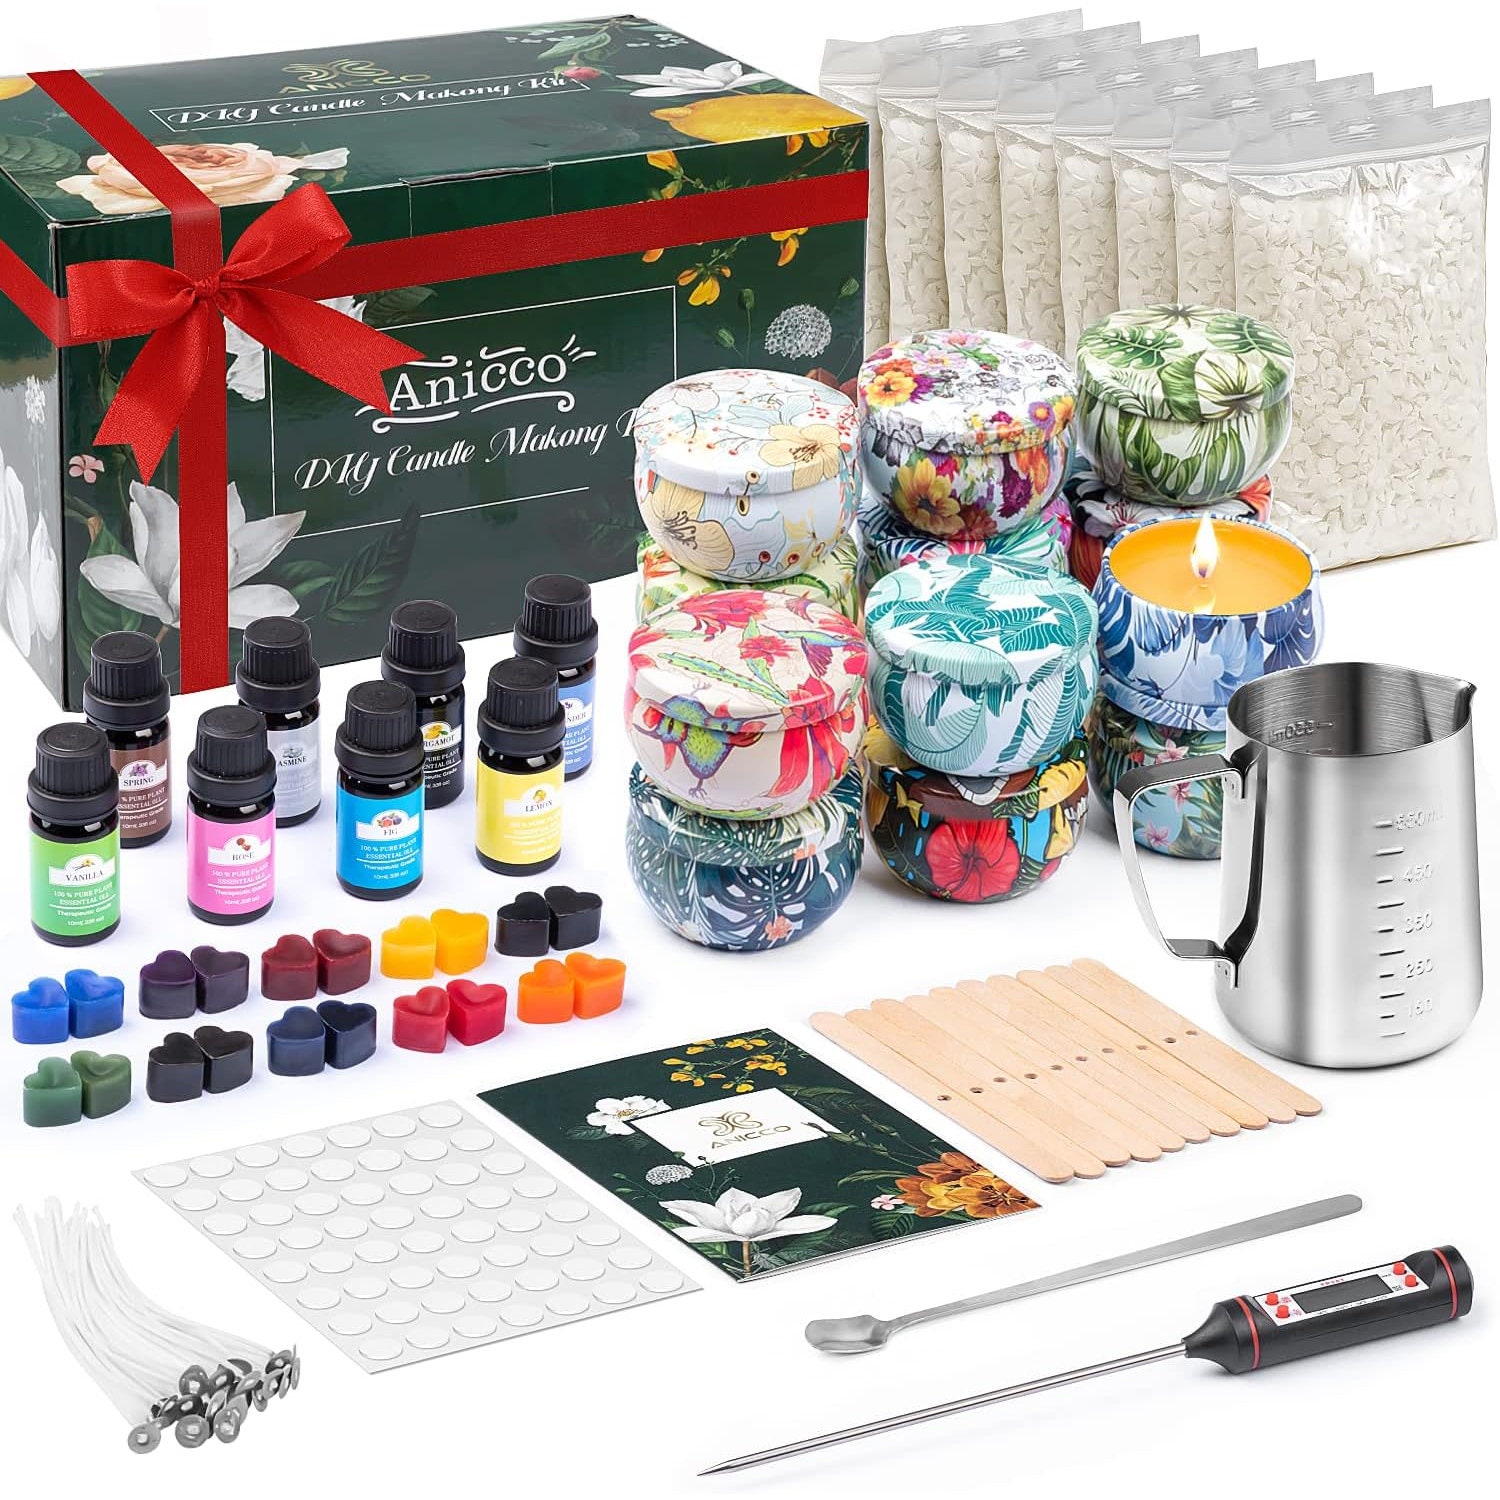 DIY Candle Kit.candle Making Kit for Beginners .candle Kit for Adults  Crafting Supply. Candle Making Kit, Team Building. 